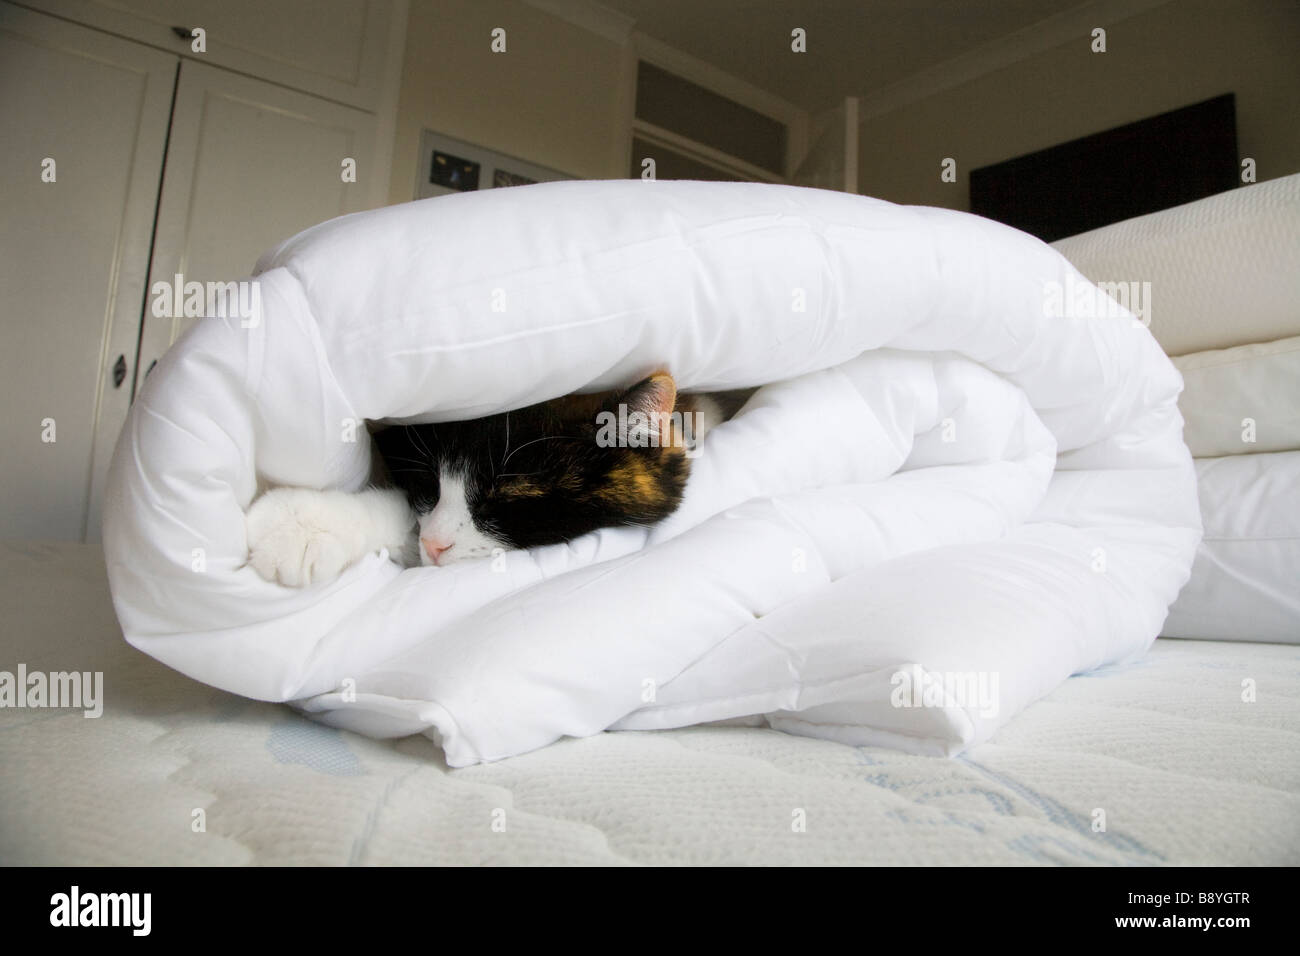 A DOMESTIC CAT SLEEPING IN A ROLLED UP DUVET ON A BED IN THE BEDROOM Stock Photo